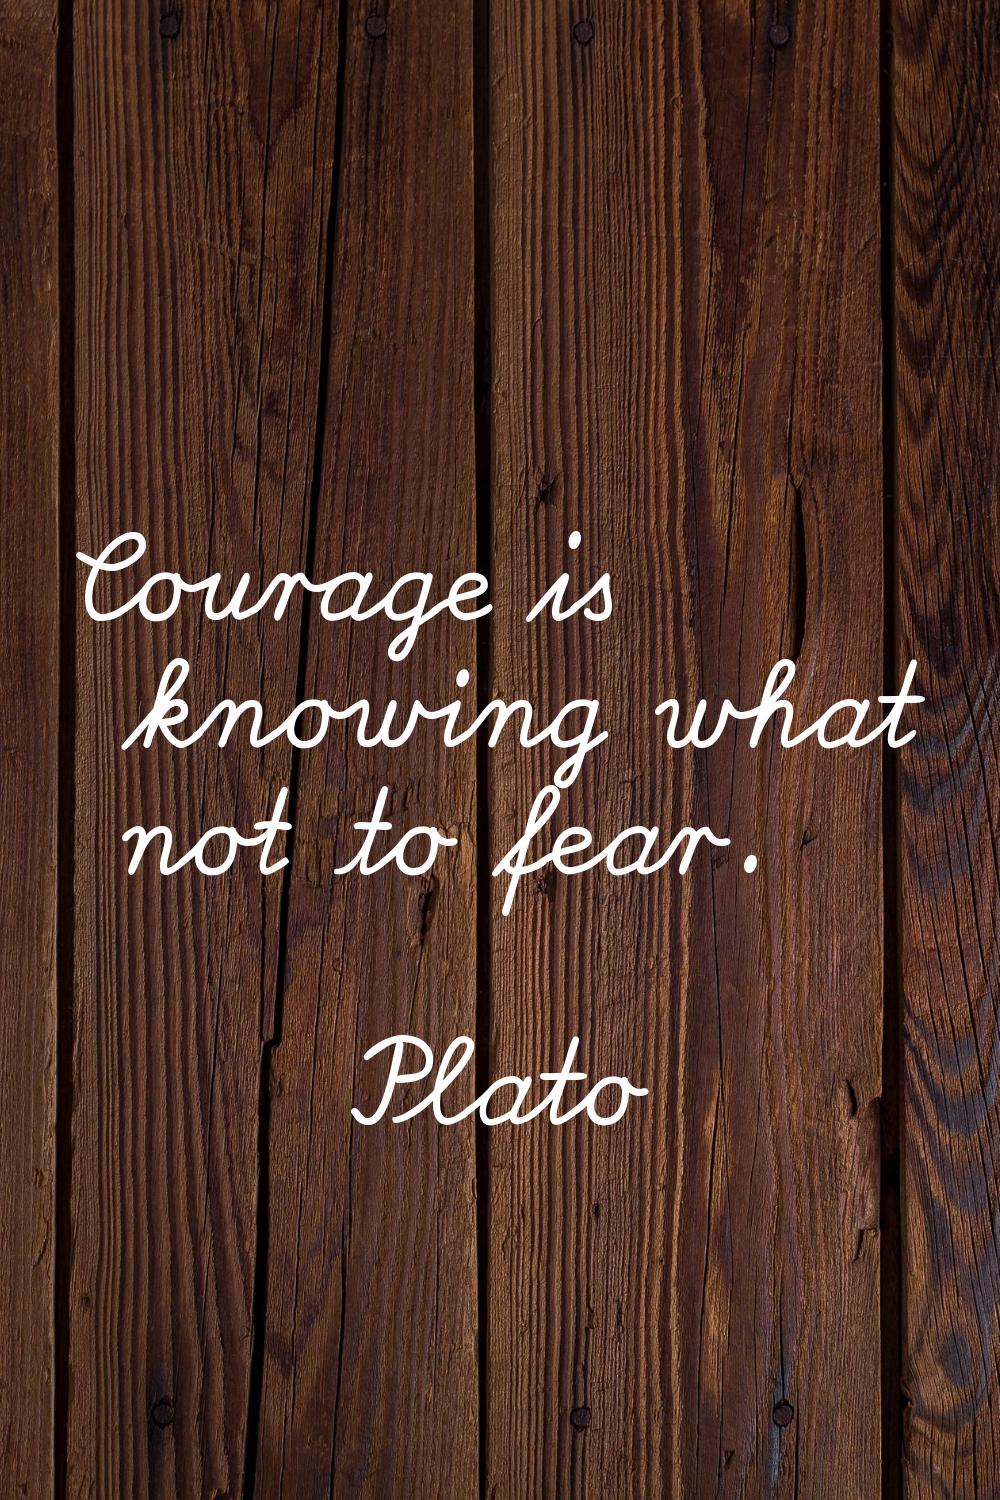 Courage is knowing what not to fear.